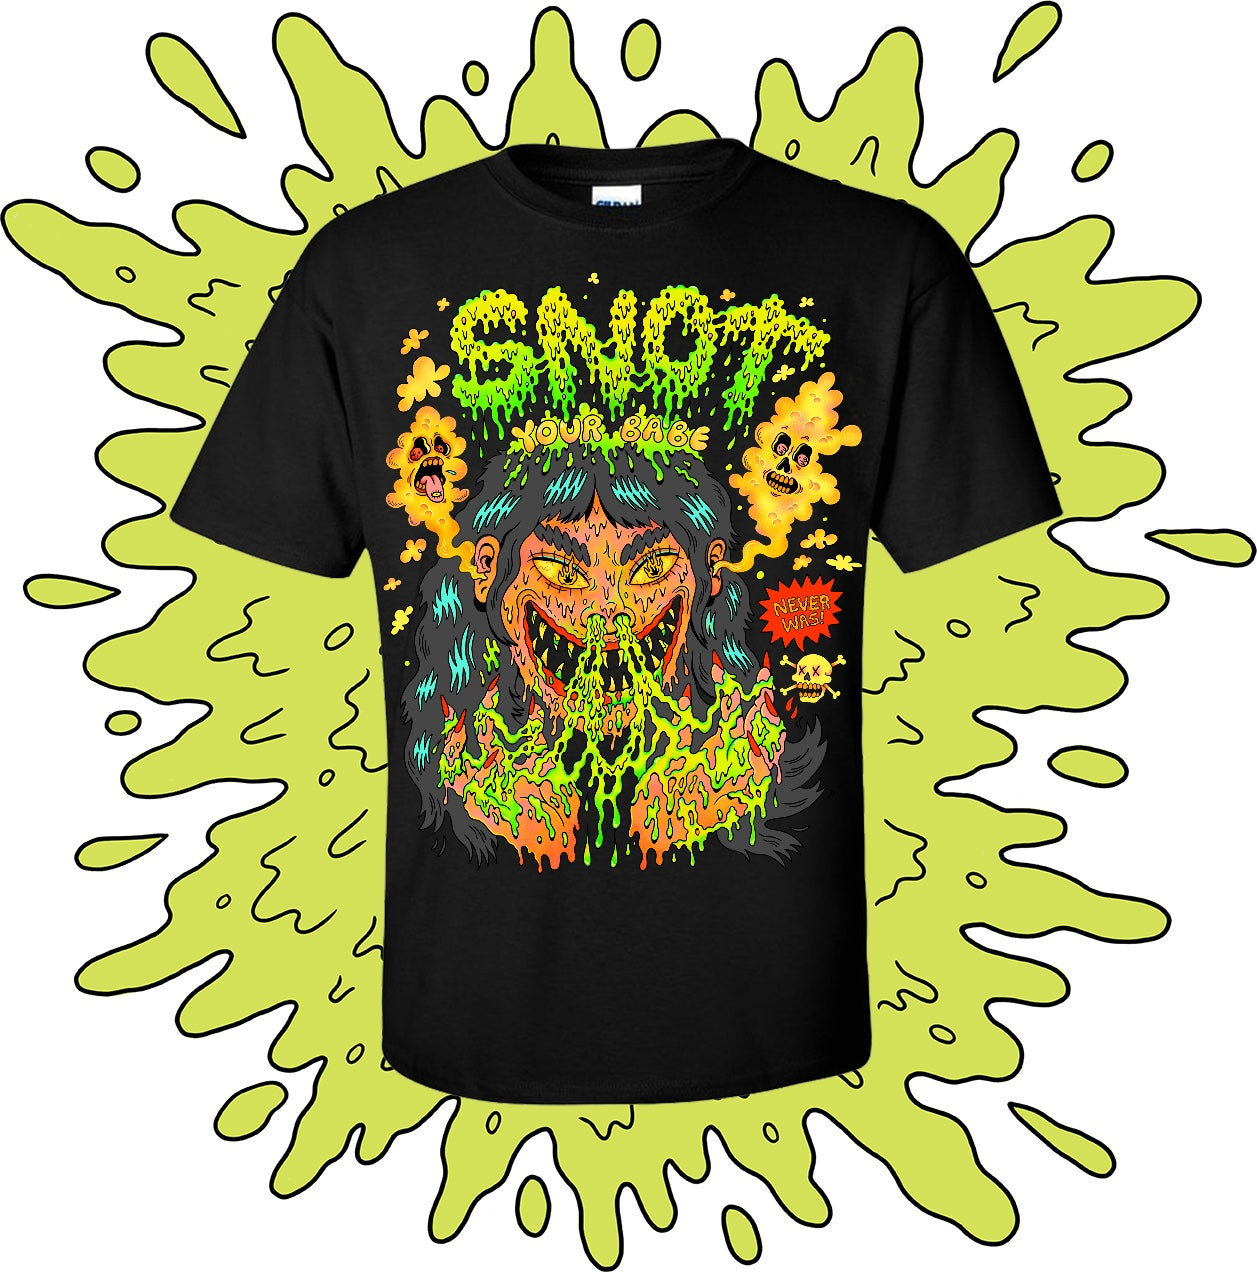 SNOT YOUR BABE